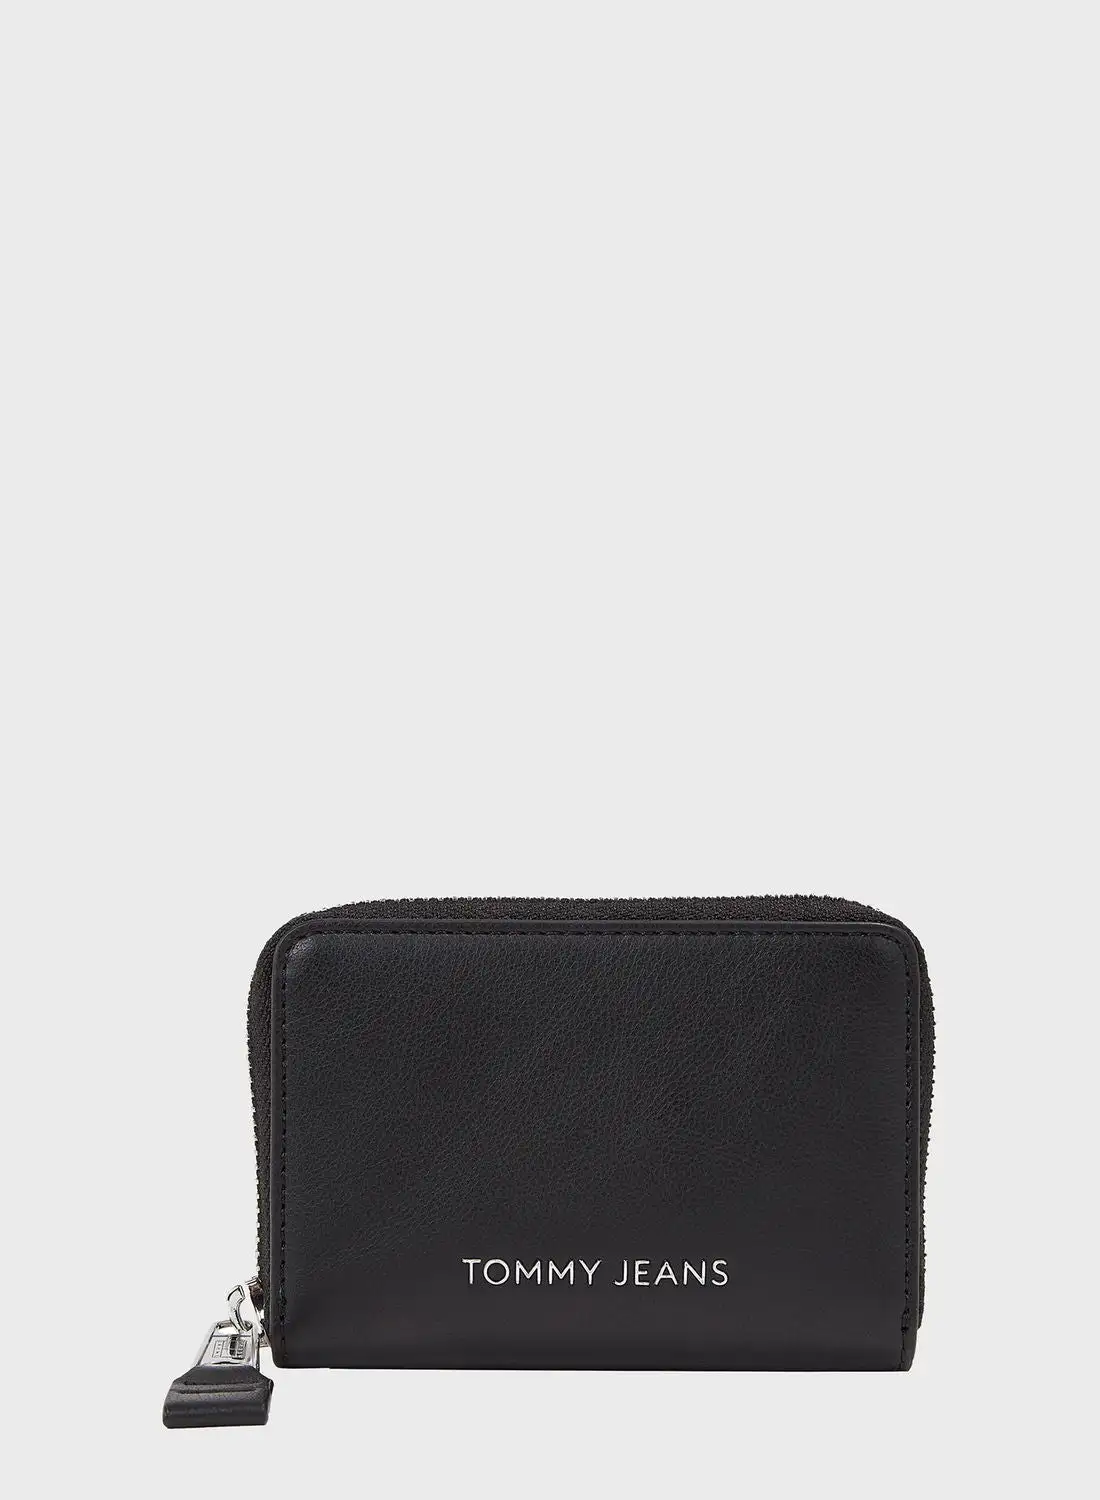 TOMMY JEANS Essential Zip Around Small Wallet